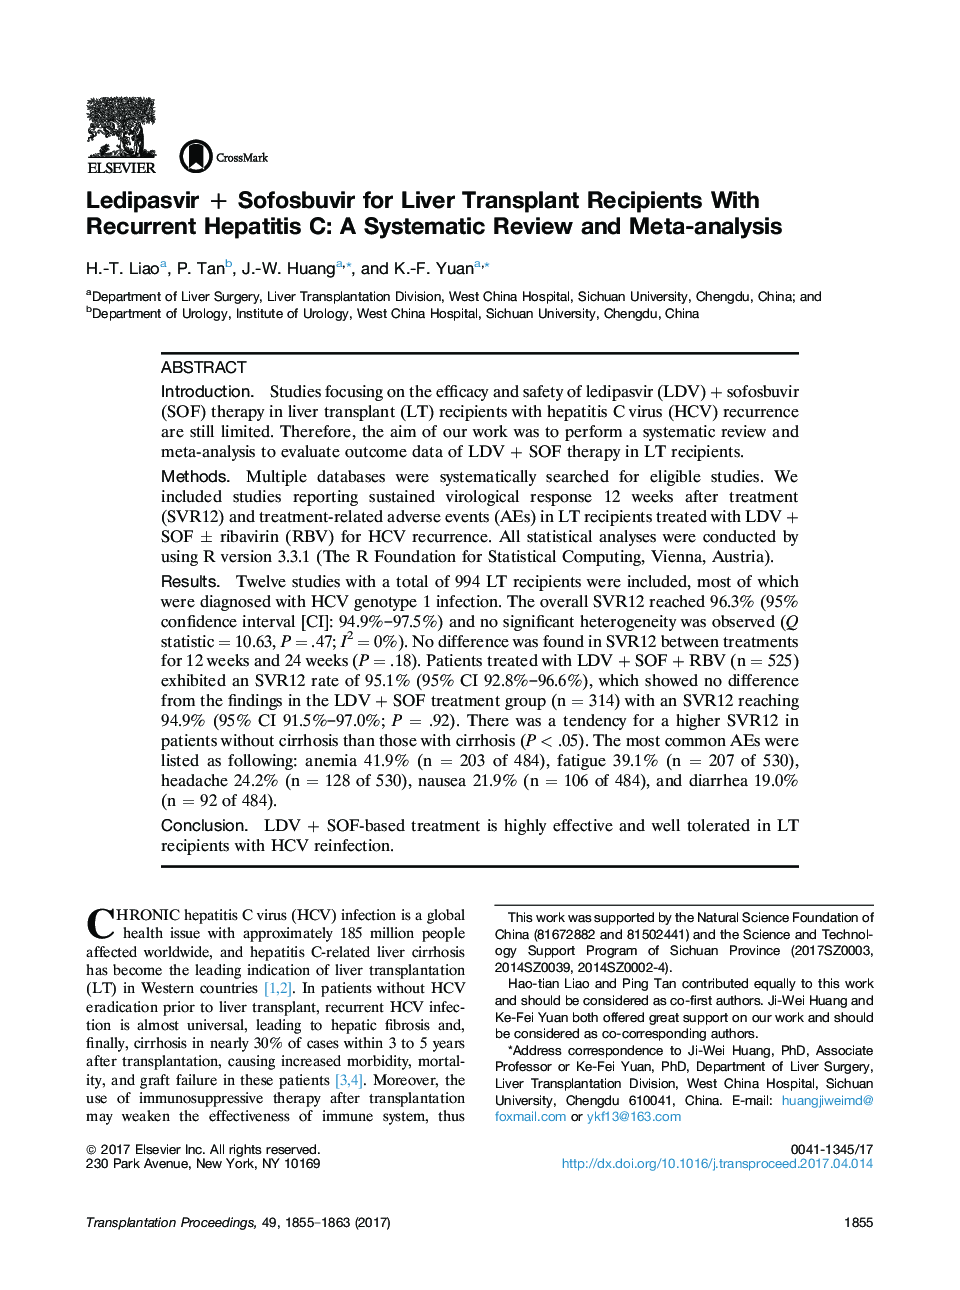 New Approaches in TransplantationLiver transplantationLedipasvirÂ + Sofosbuvir for Liver Transplant Recipients With Recurrent Hepatitis C: A Systematic Review and Meta-analysis